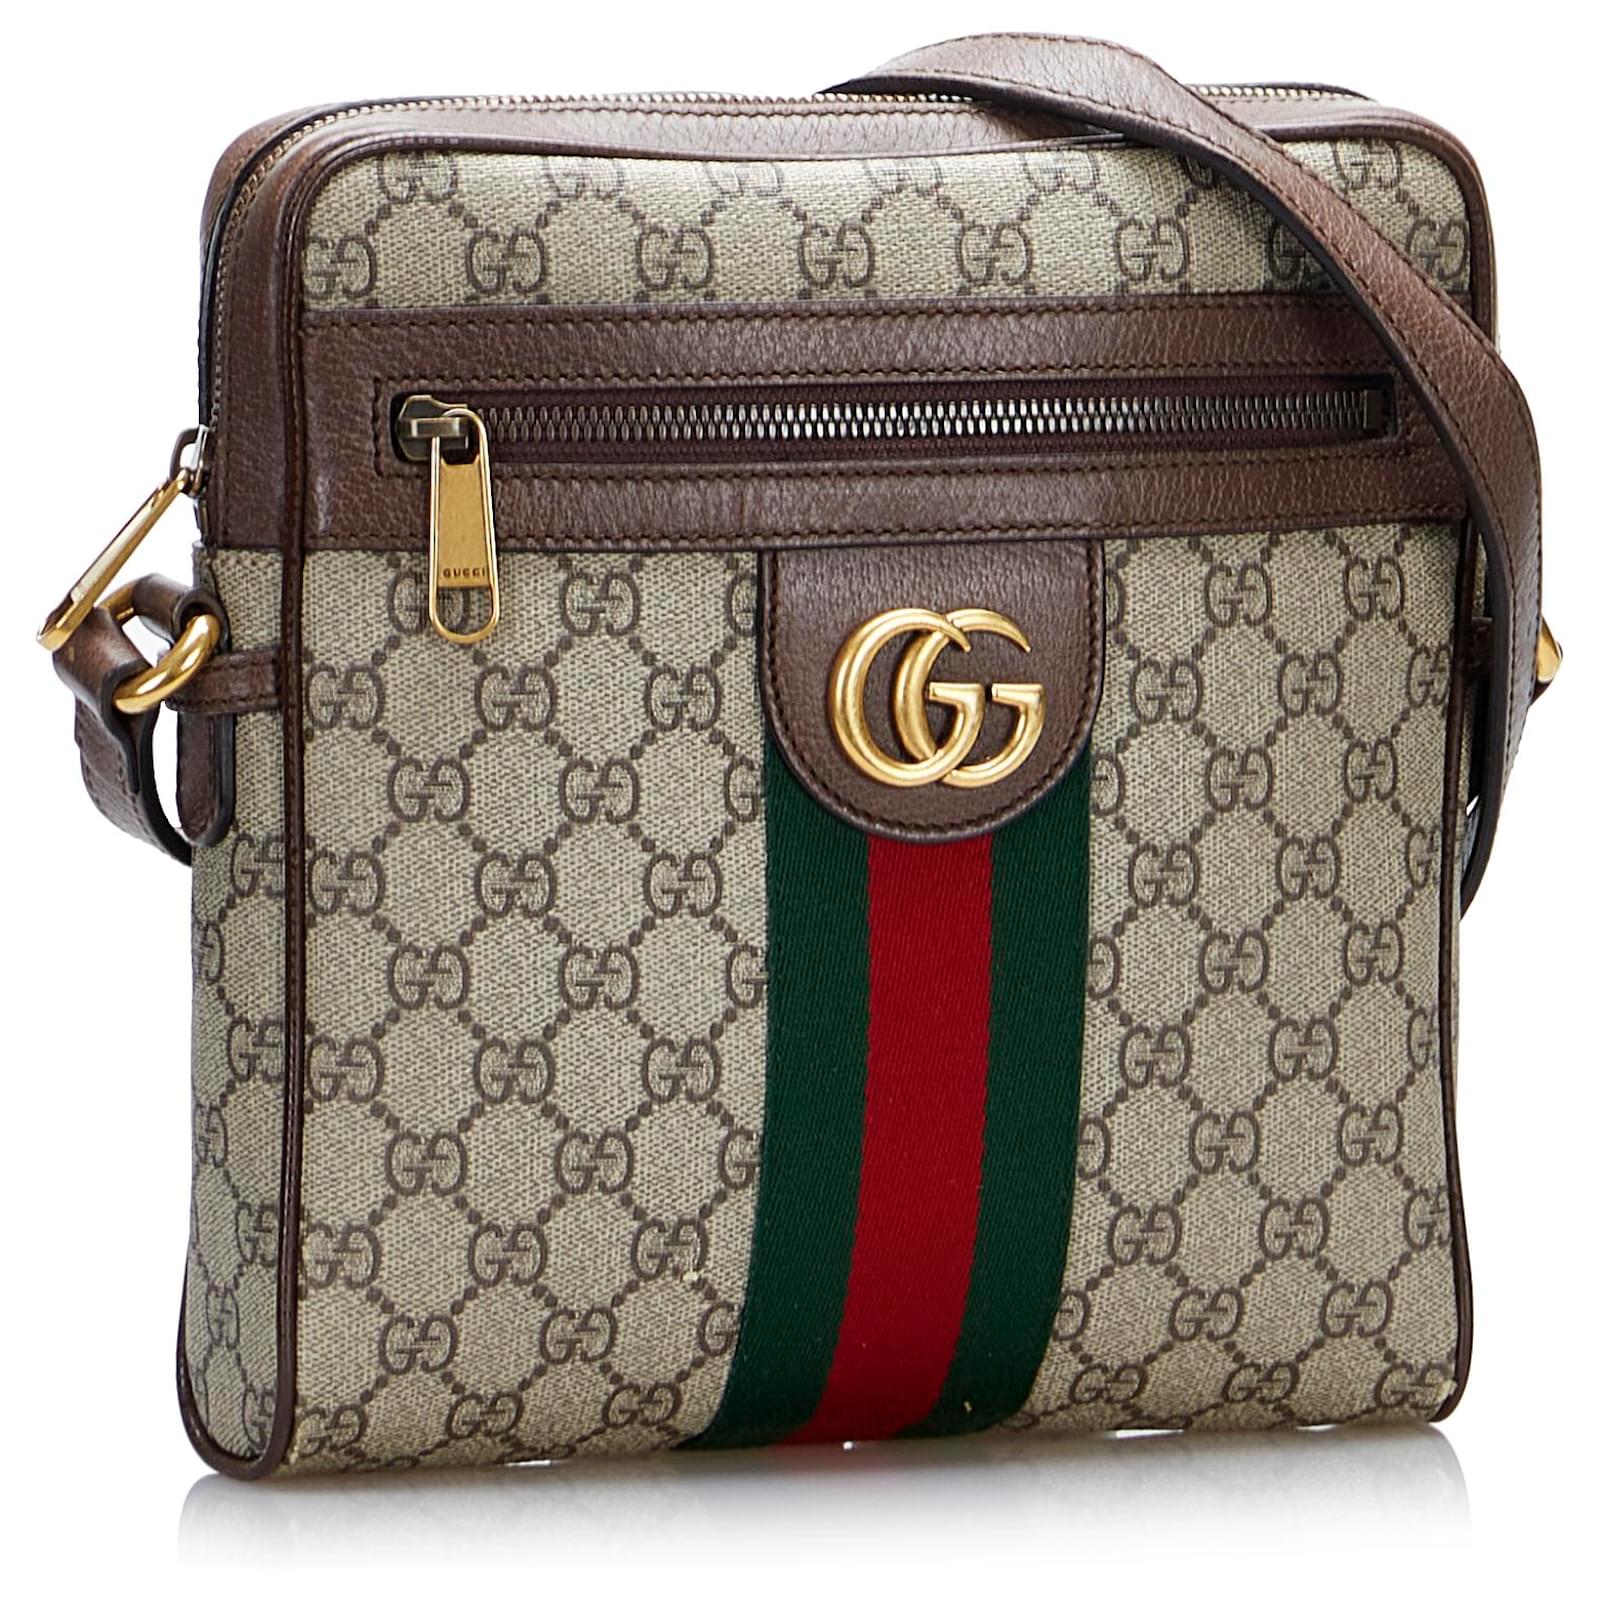 Gucci Ophidia GG Supreme Squared Zip Pouch Brown